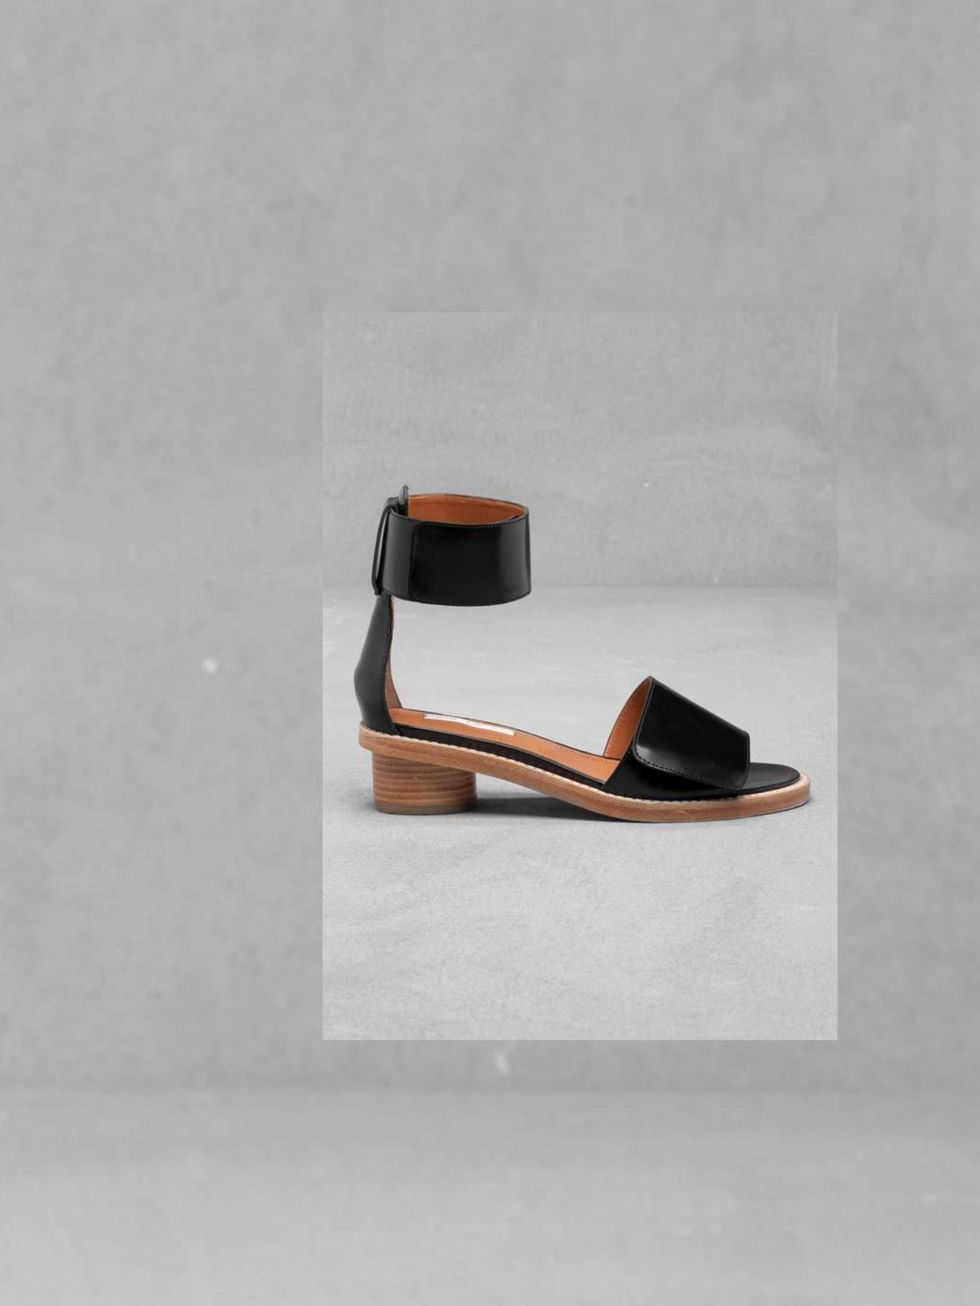 <p>A pair of simple black leather sandals with this season's low stacked heel will update any outfit. This quietly elegant style is a great match for a bold statement skirt... <a href="http://www.stories.com/Shoes/Heels/Block_heel_sandals/582750-563108.1"